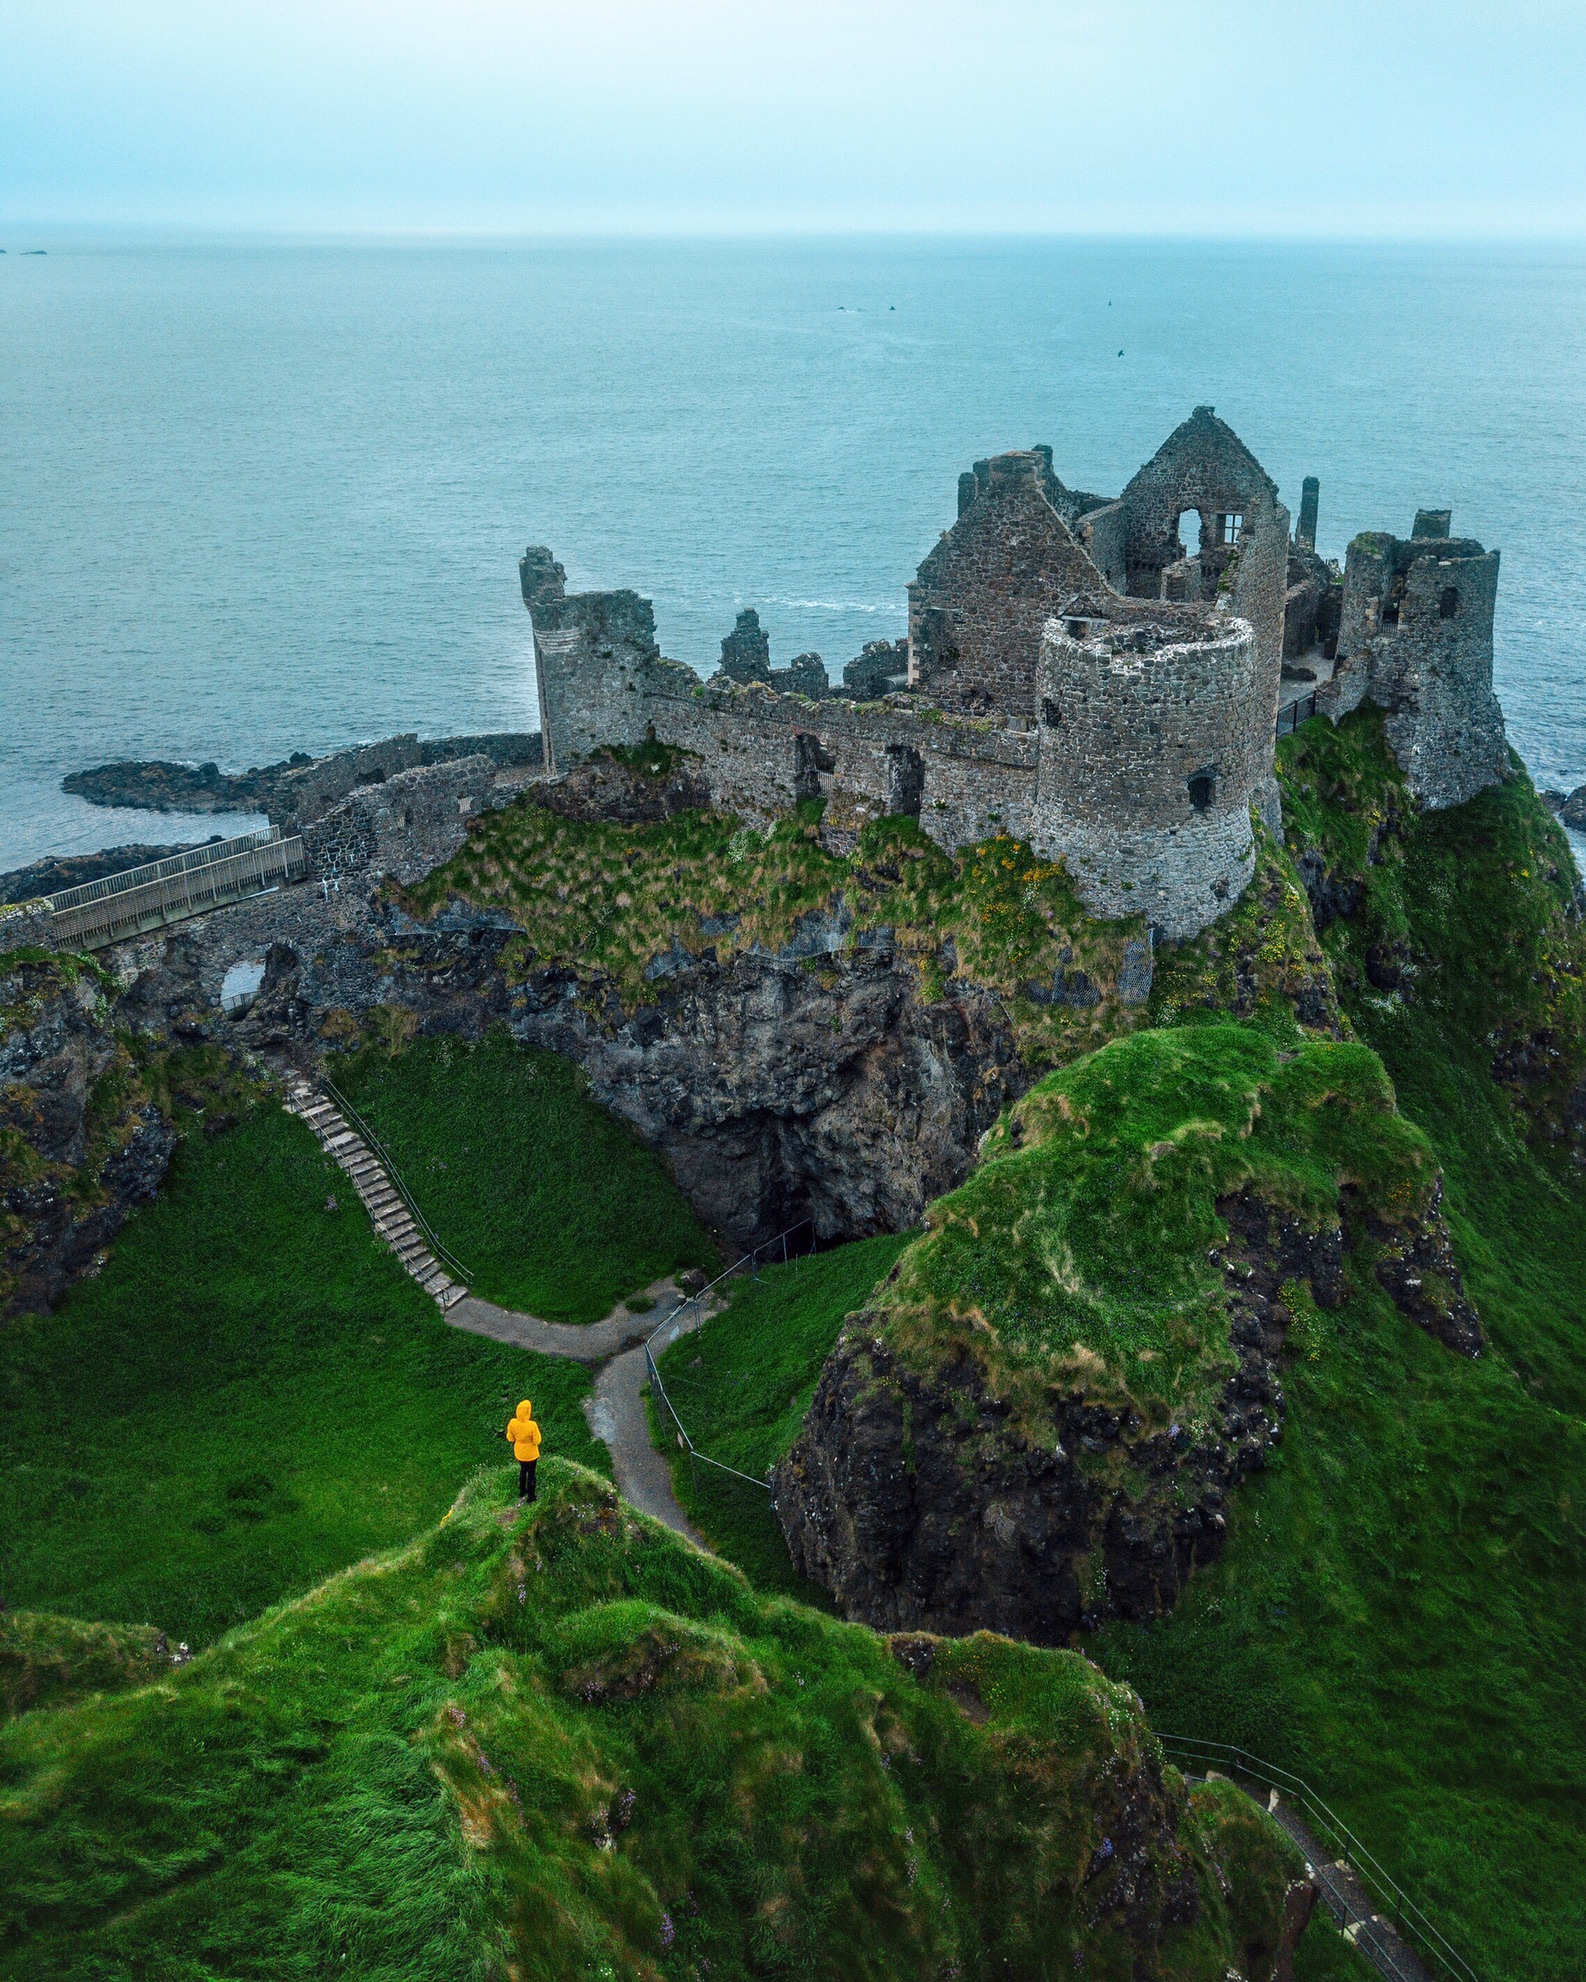 Person in yellow coat looking at a castle in Ireland the picture is taken from above.  